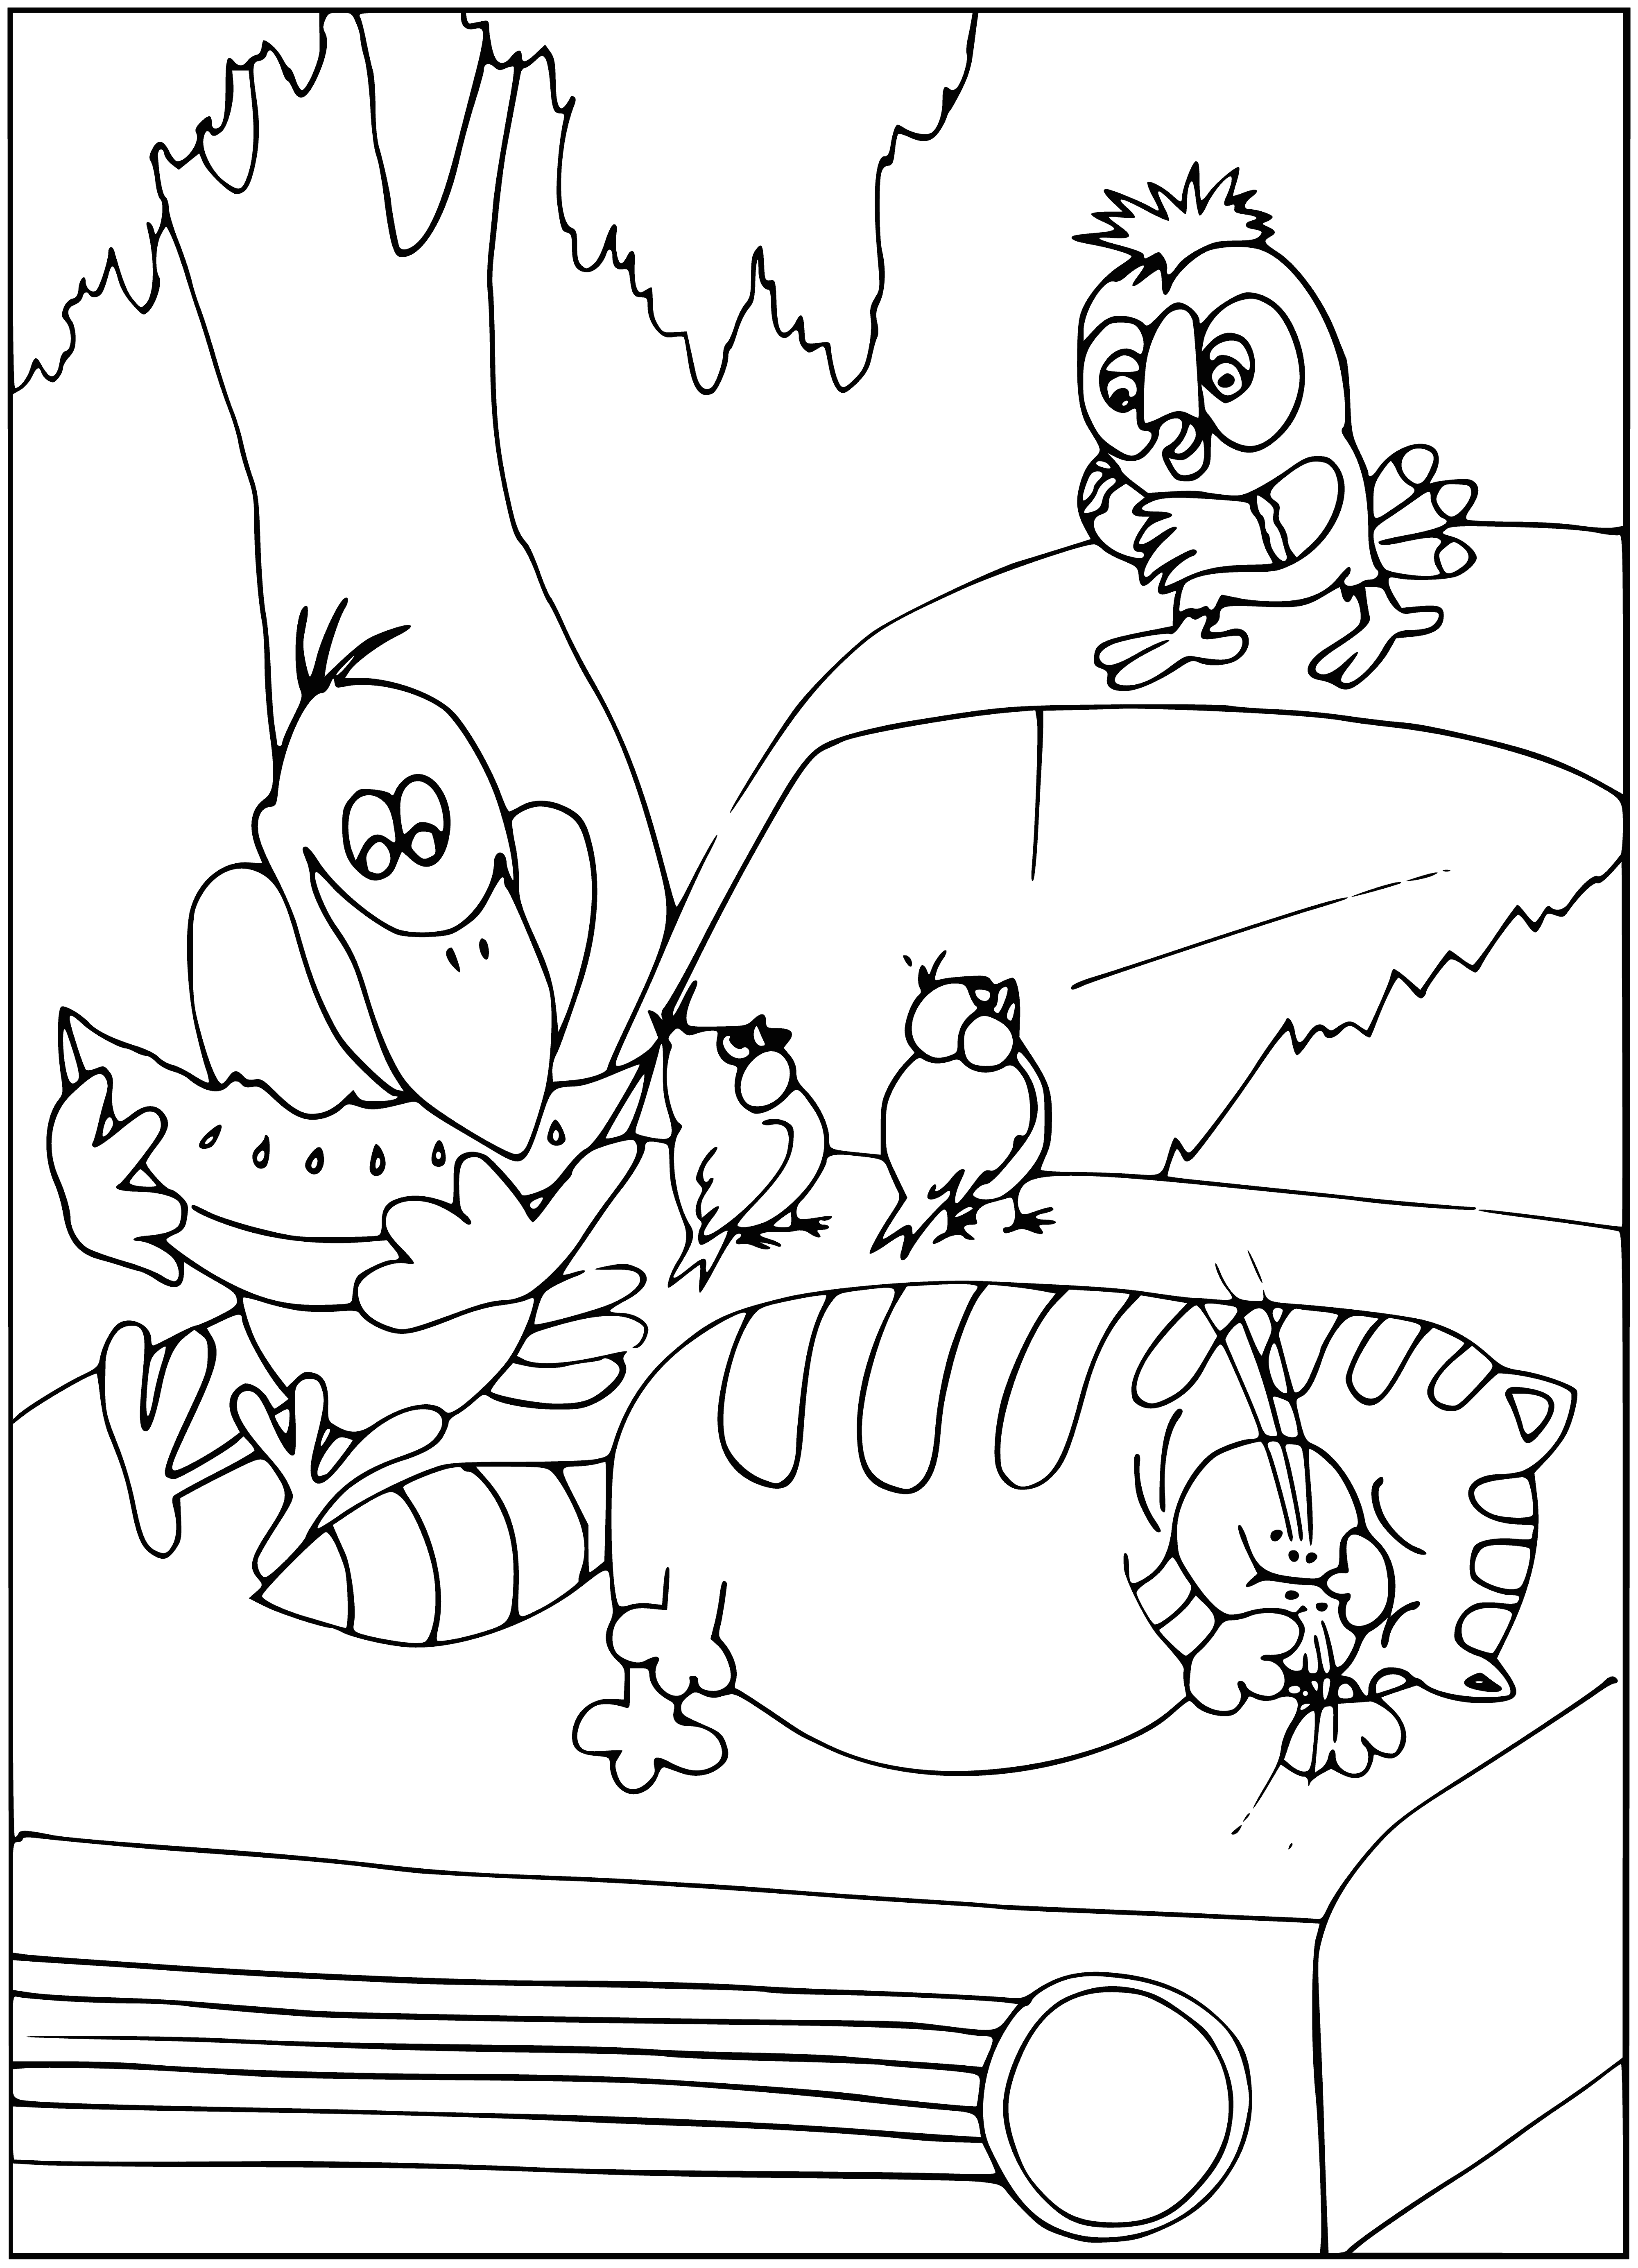 coloring page: A blue & yellow parrot looks over its shoulder at a red & green parrot flying back.